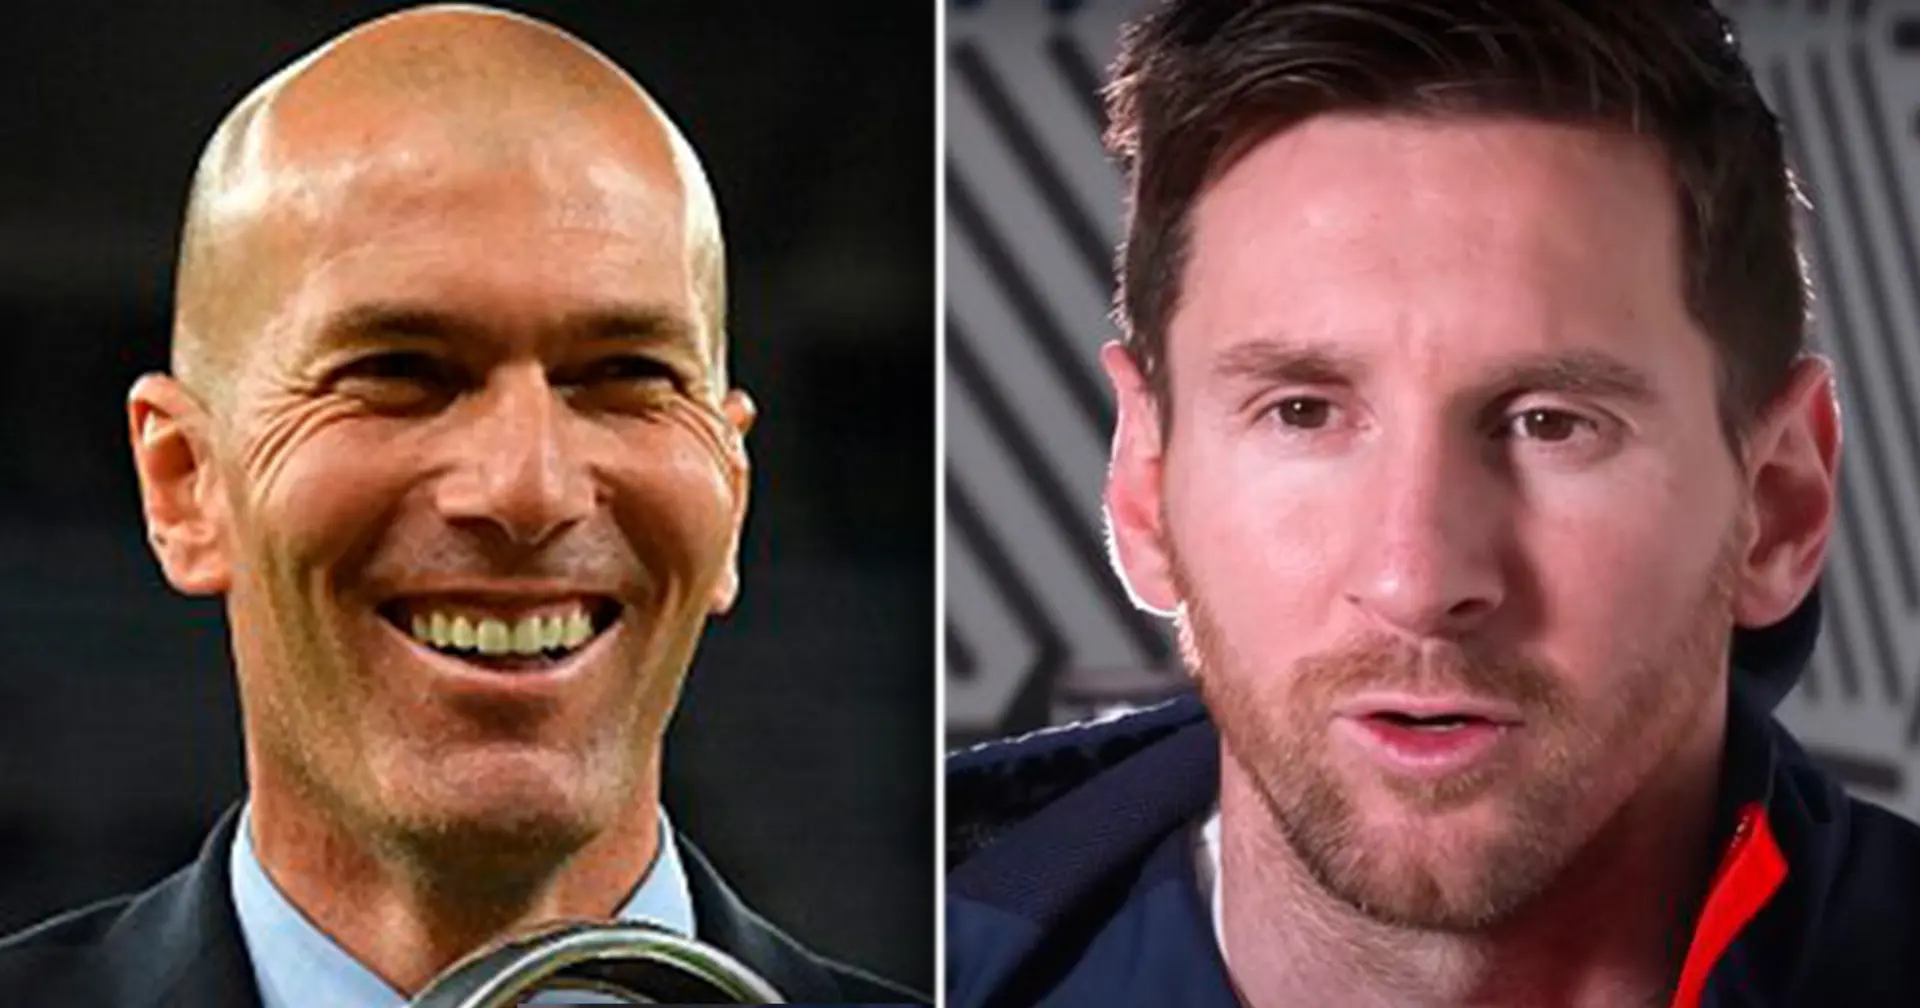 Messi makes special Zidane reference when asked about his post-career future